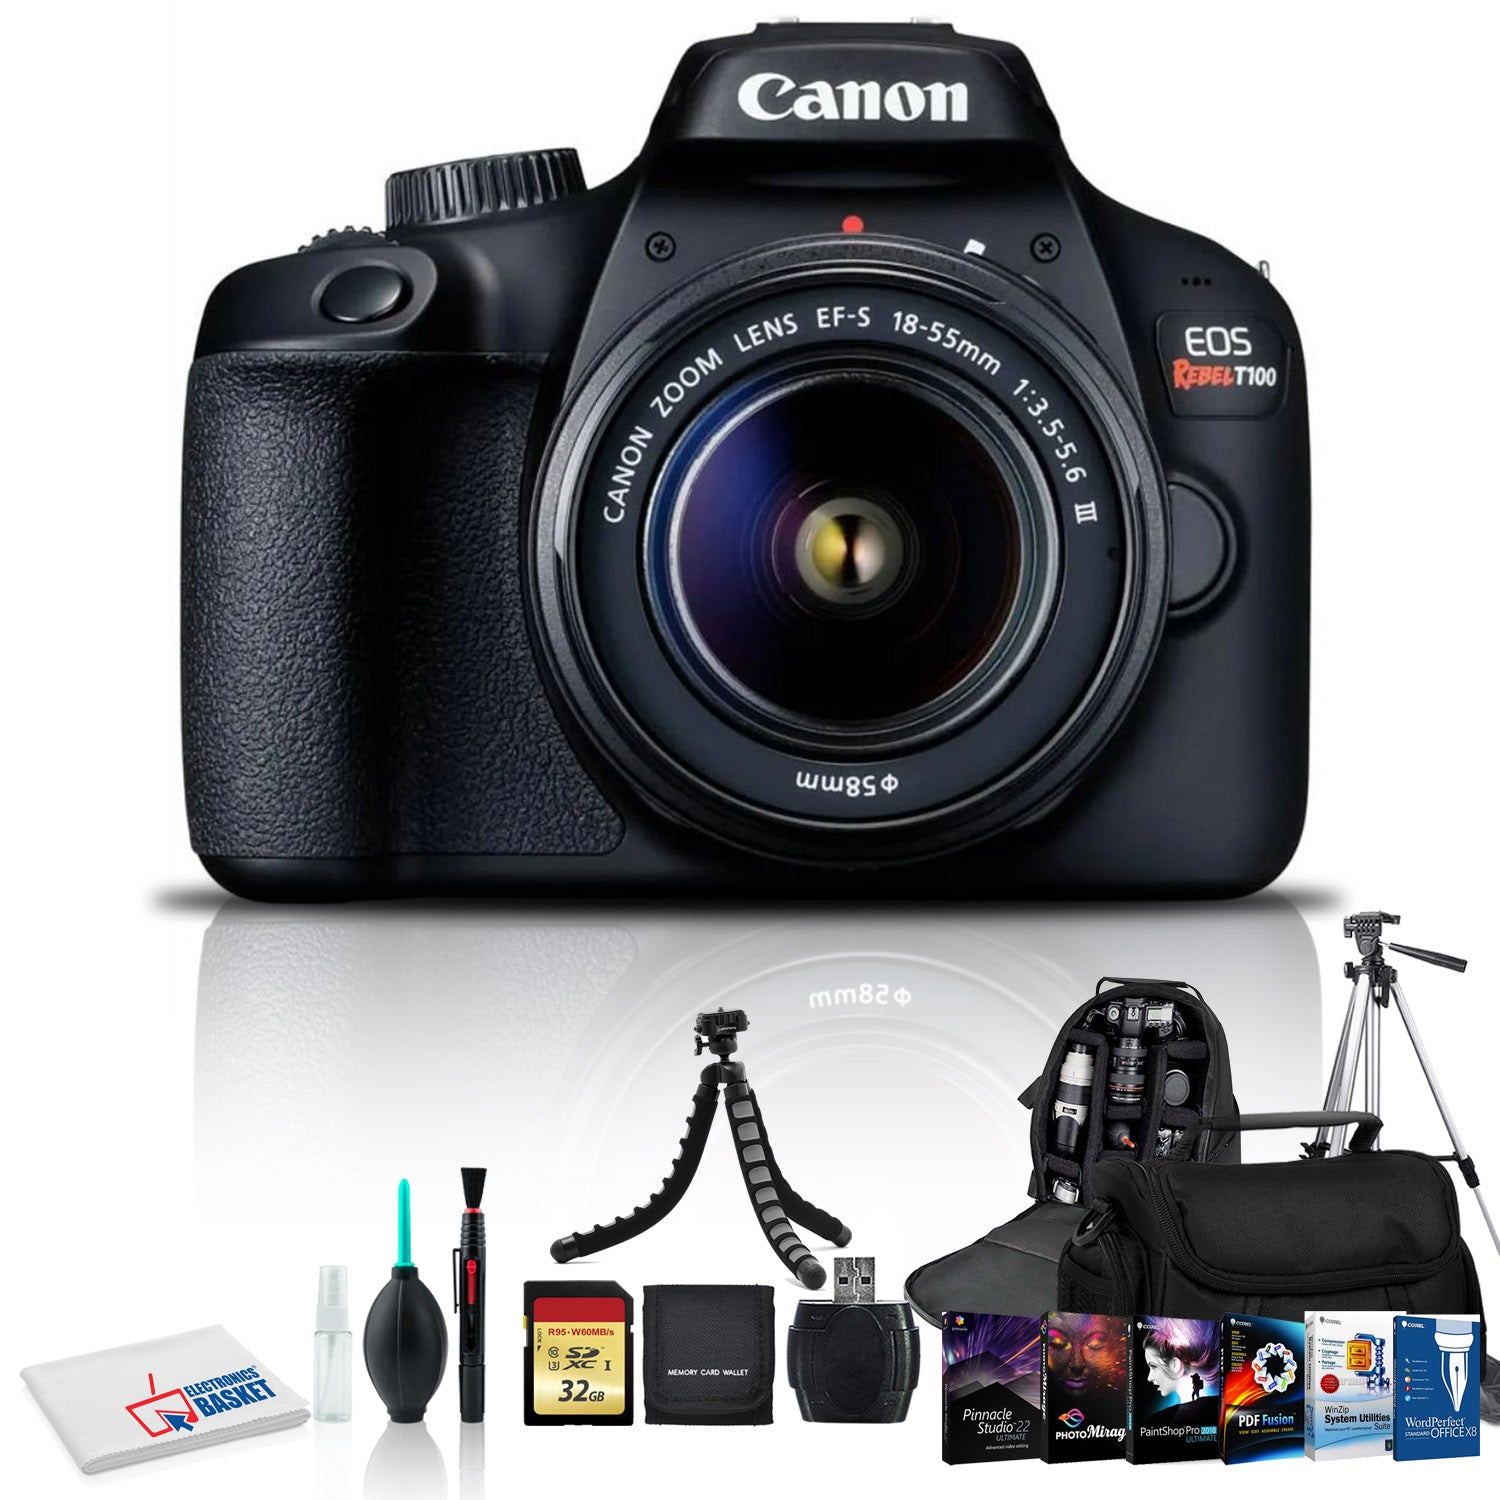 Canon EOS Rebel T100 DSLR Camera with 18-55mm Lens, Cleaning Kit, 32GB Memory, Carry Case, Backpack, Tripods, Corel Software Kit